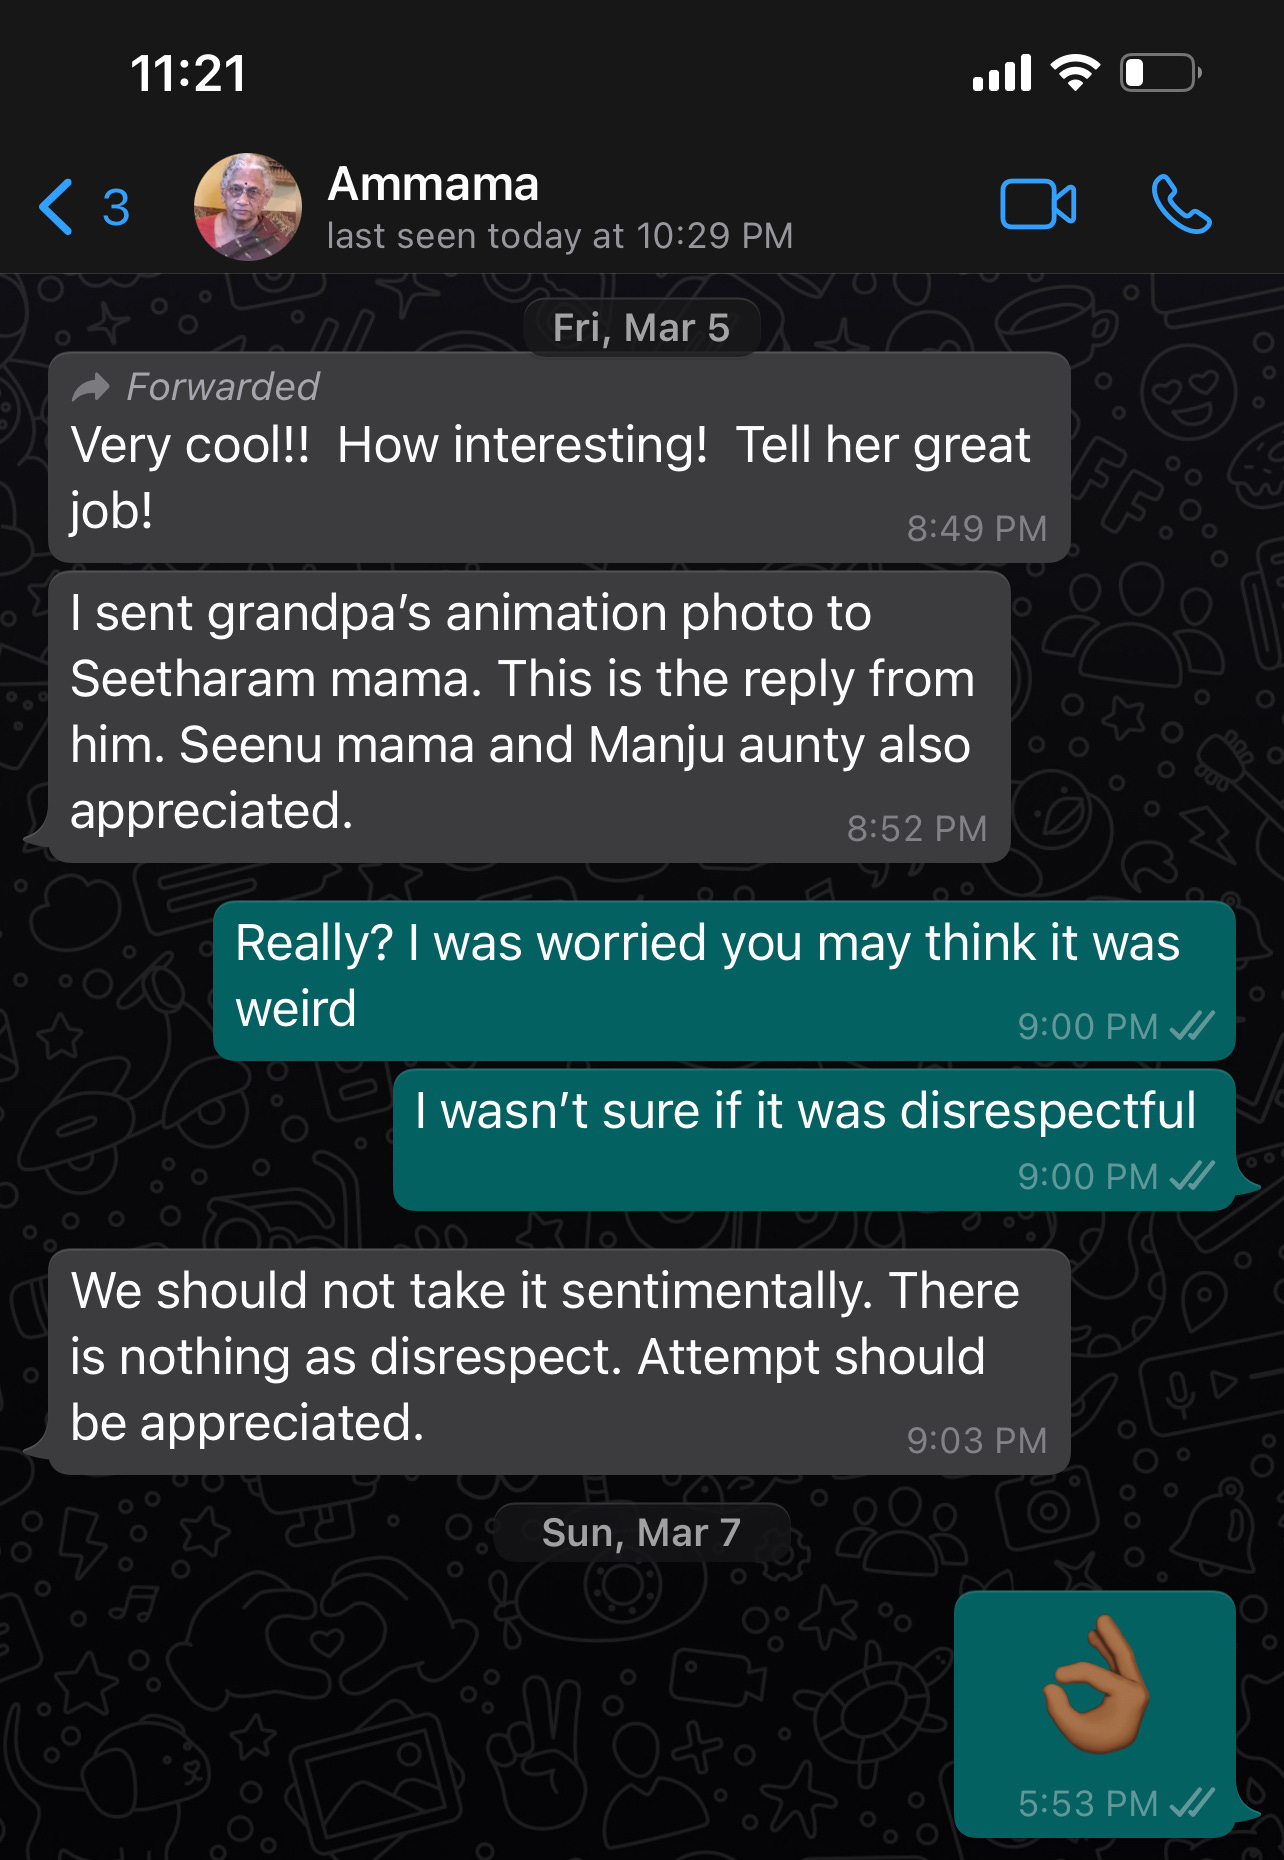 A whatsapp screenshot of a conversation with my grandmother where I ask her whether she felt the myheritage animation was disrespectful and she responds that she liked it and that "we should not take it sentimentally. There is nothing as disrespect. Attempt should be appreciated"